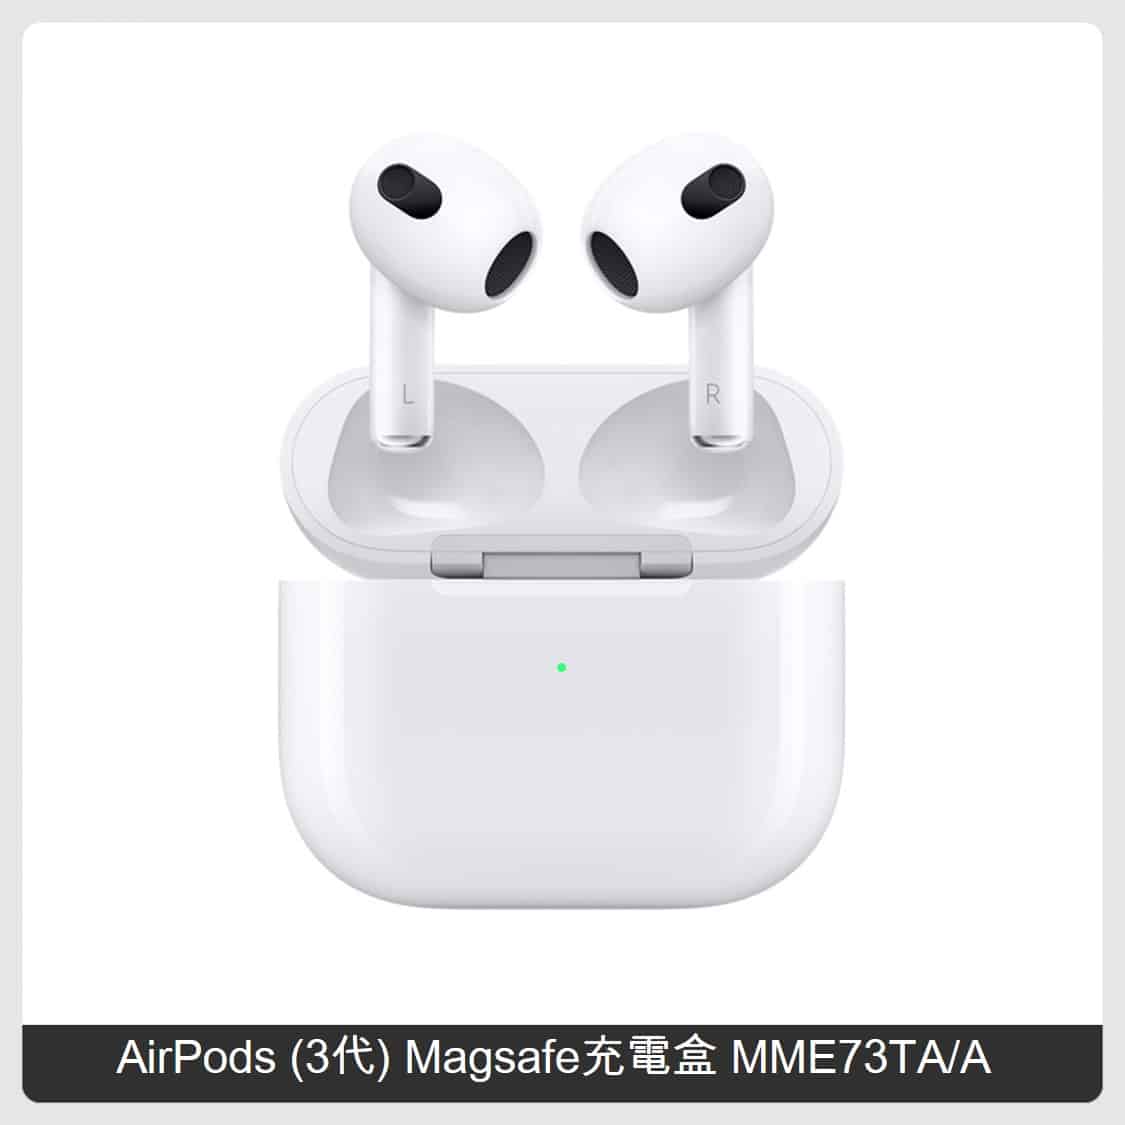 Apple AirPods (3代) Magsafe充電盒(MME73TA/A) | 法雅客網路商店